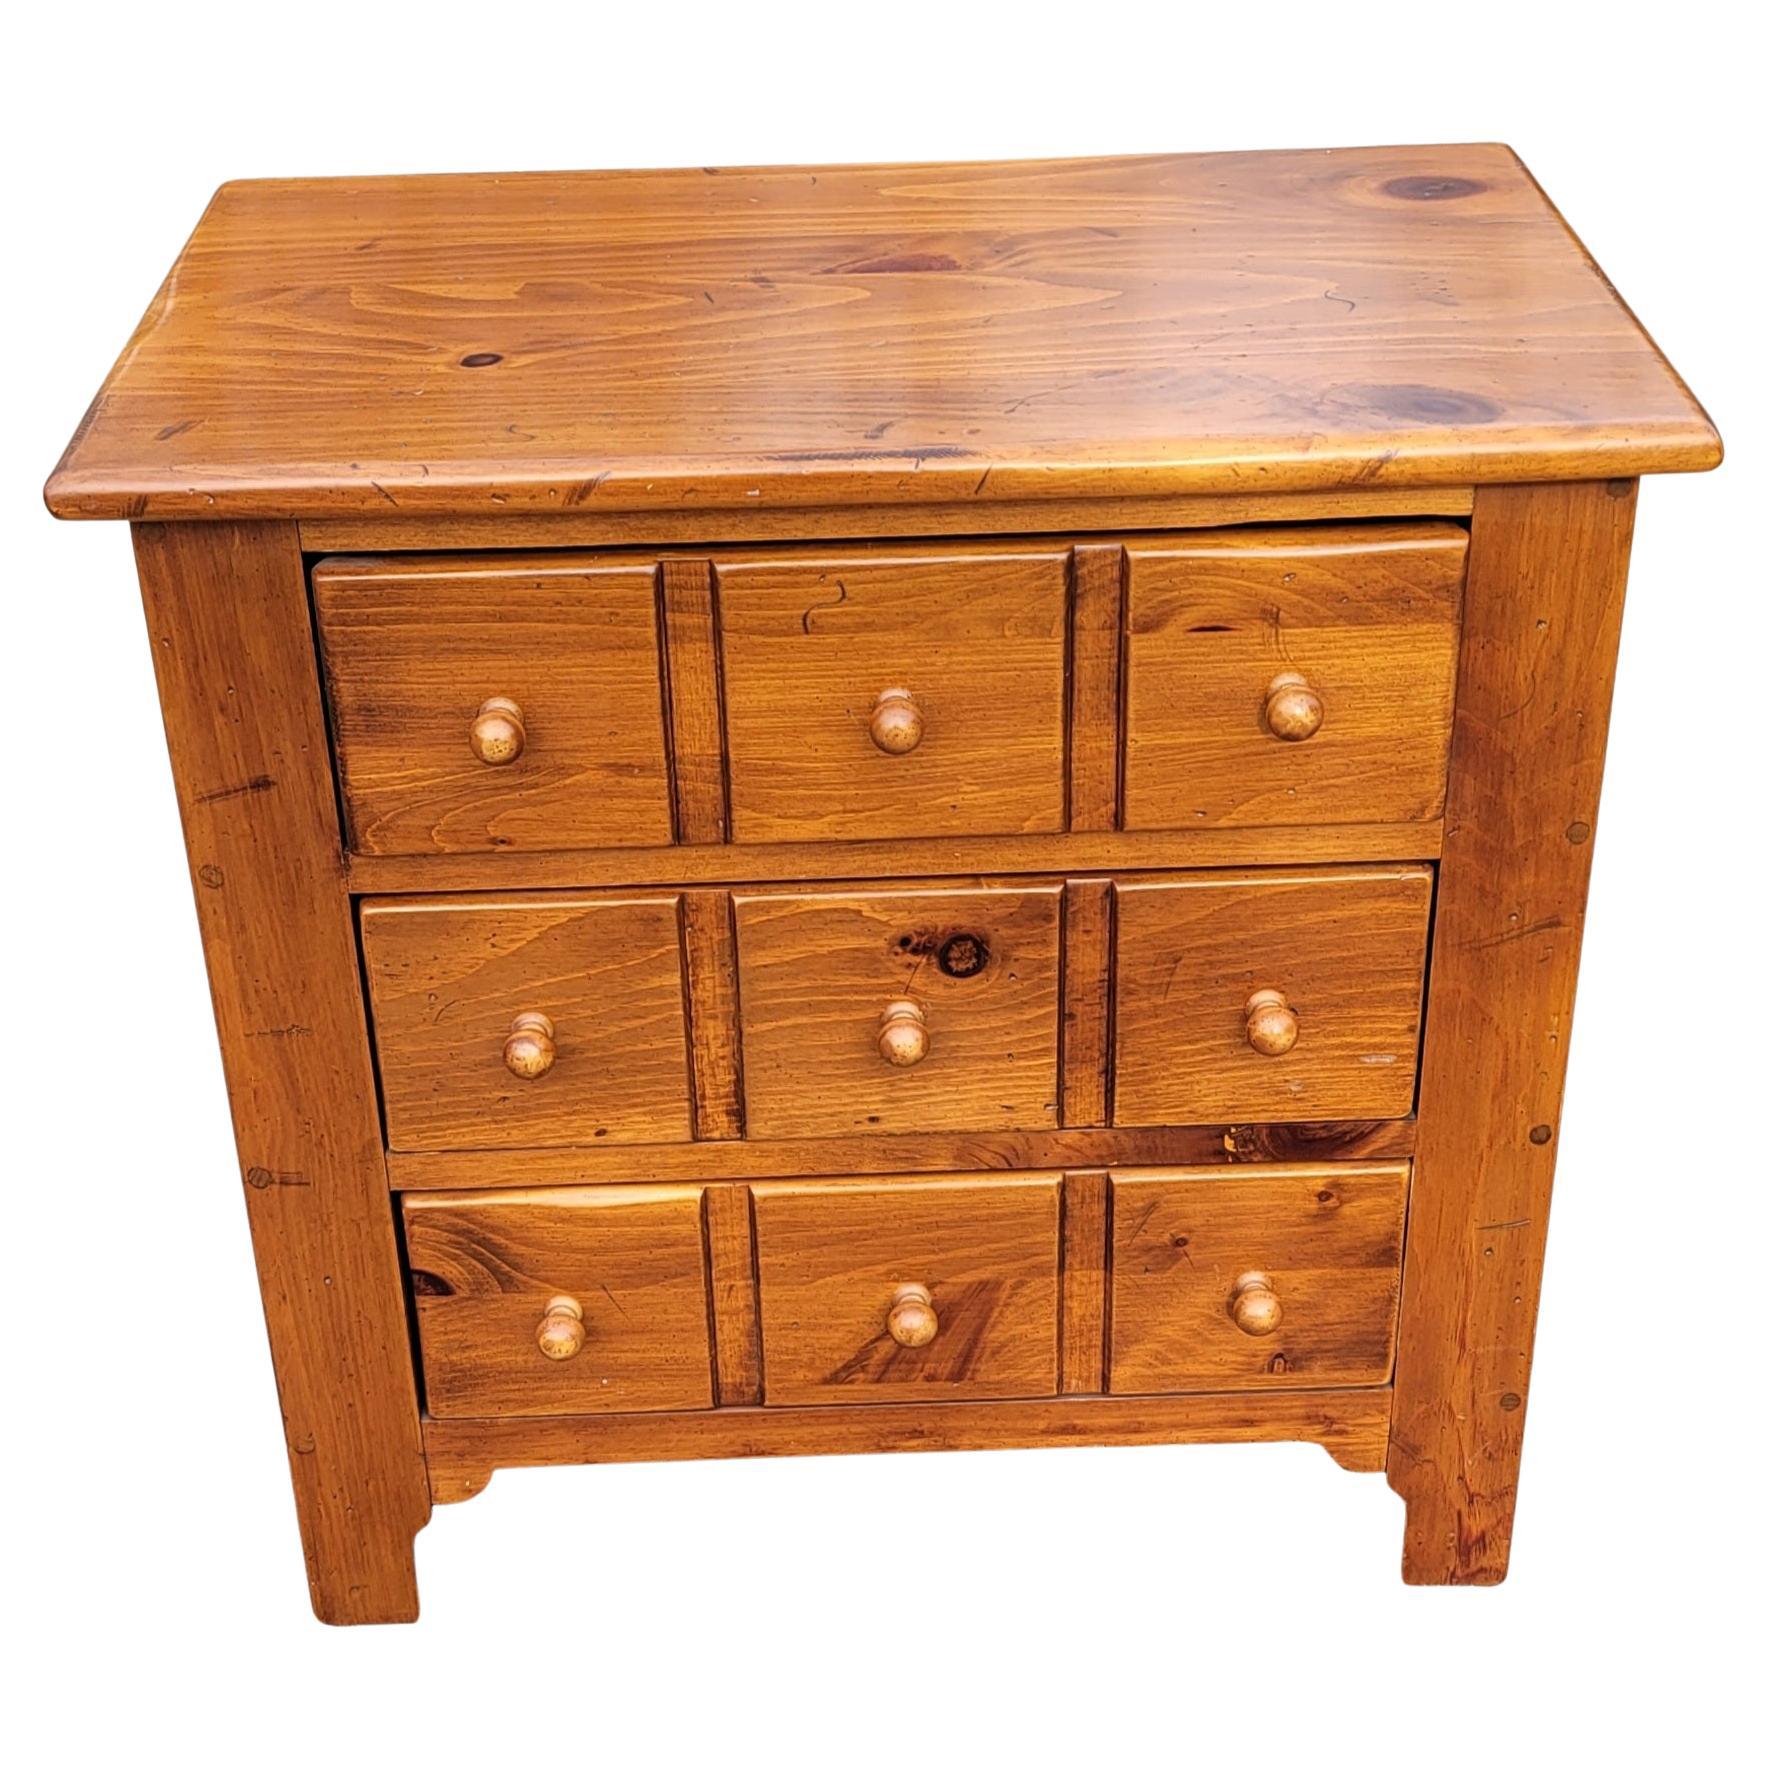 Ethan Allen Early American Style Bedside Chest of Drawers